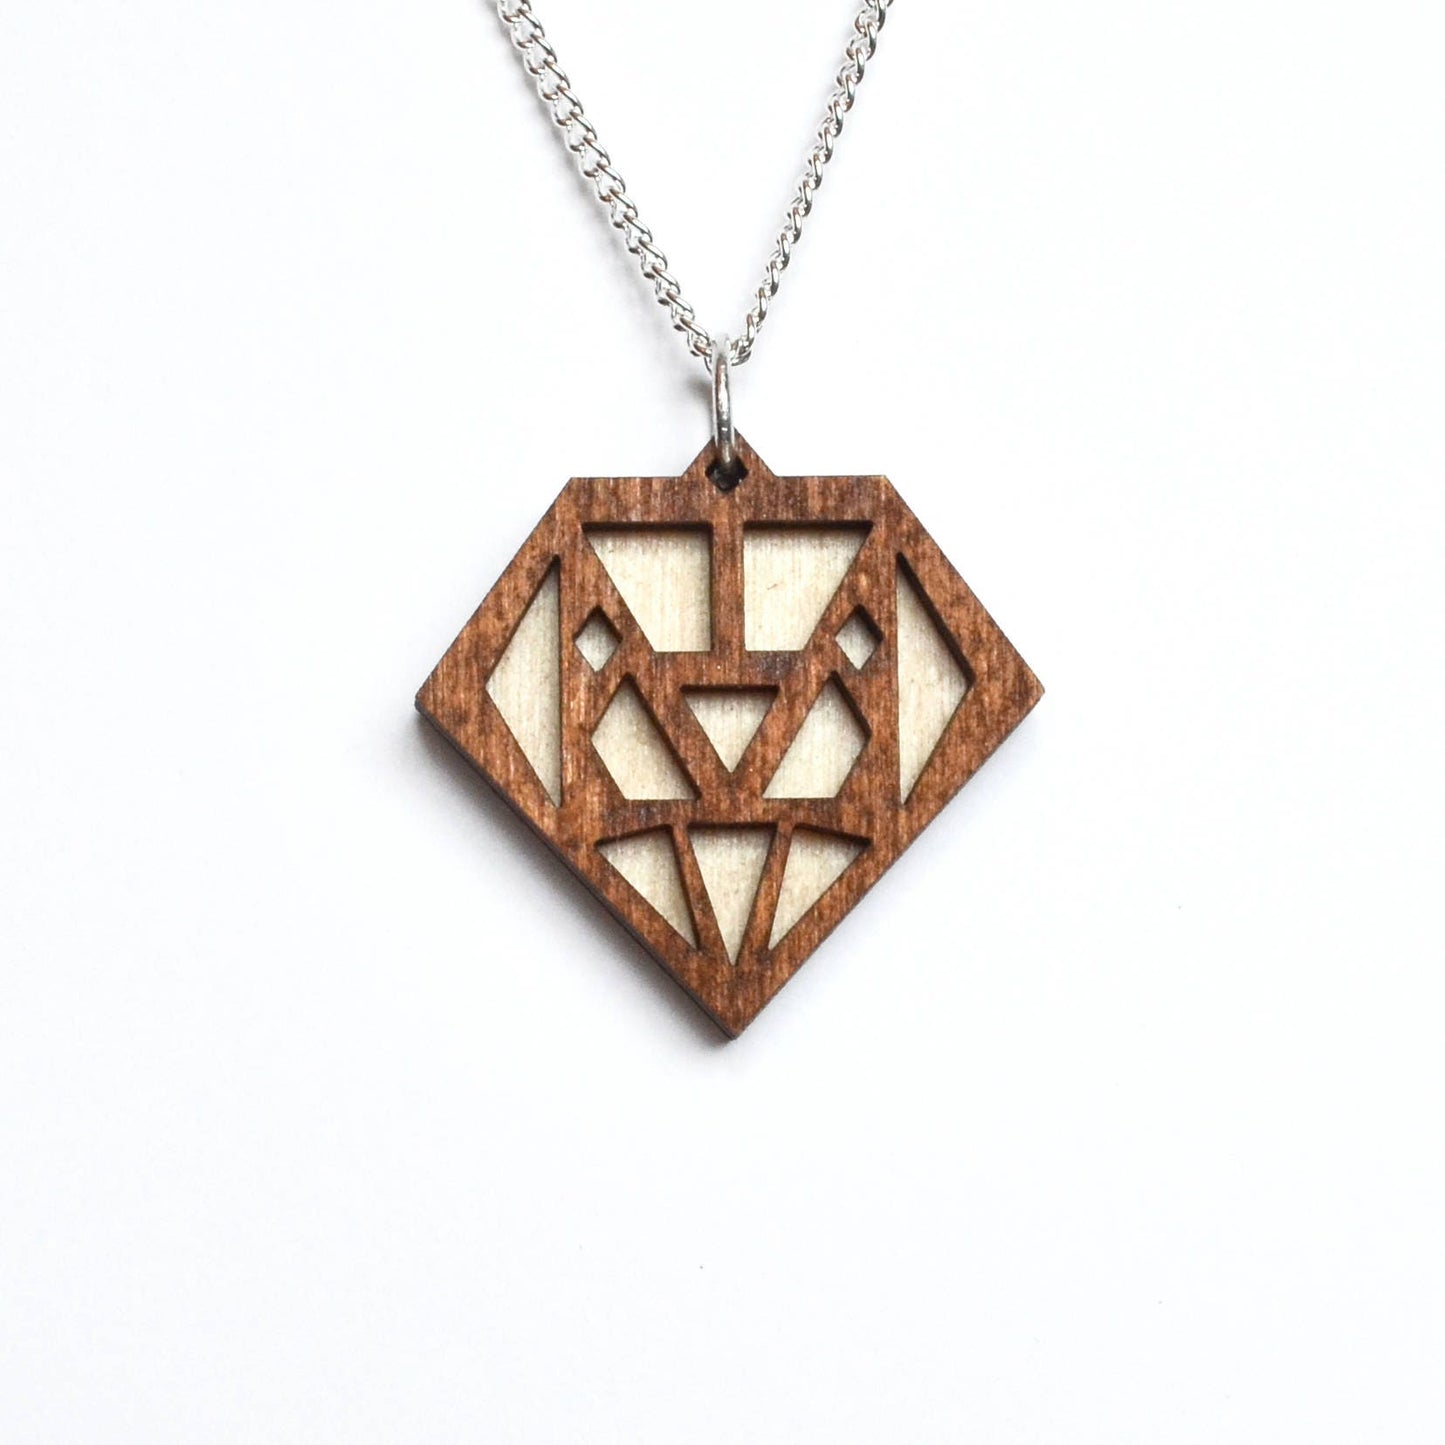 Hand Painted Wooden Art Deco Geometric Diamond Laser Cut Necklace - Small Style Design 3